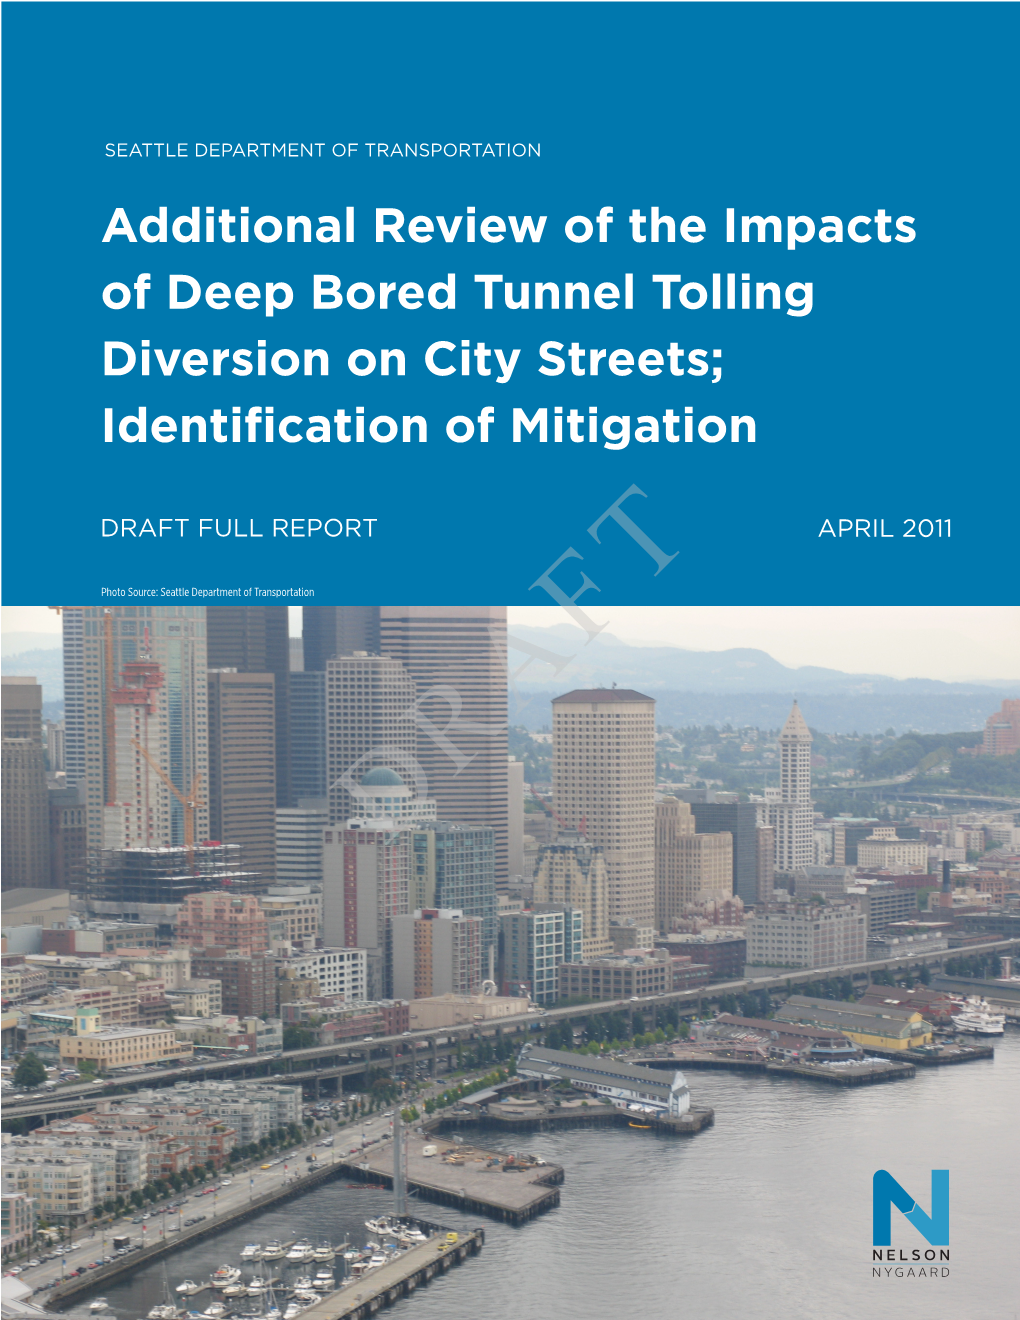 Additional Review of the Impacts of Deep Bored Tunnel Tolling Diversion on City Streets; Identification of Mitigation